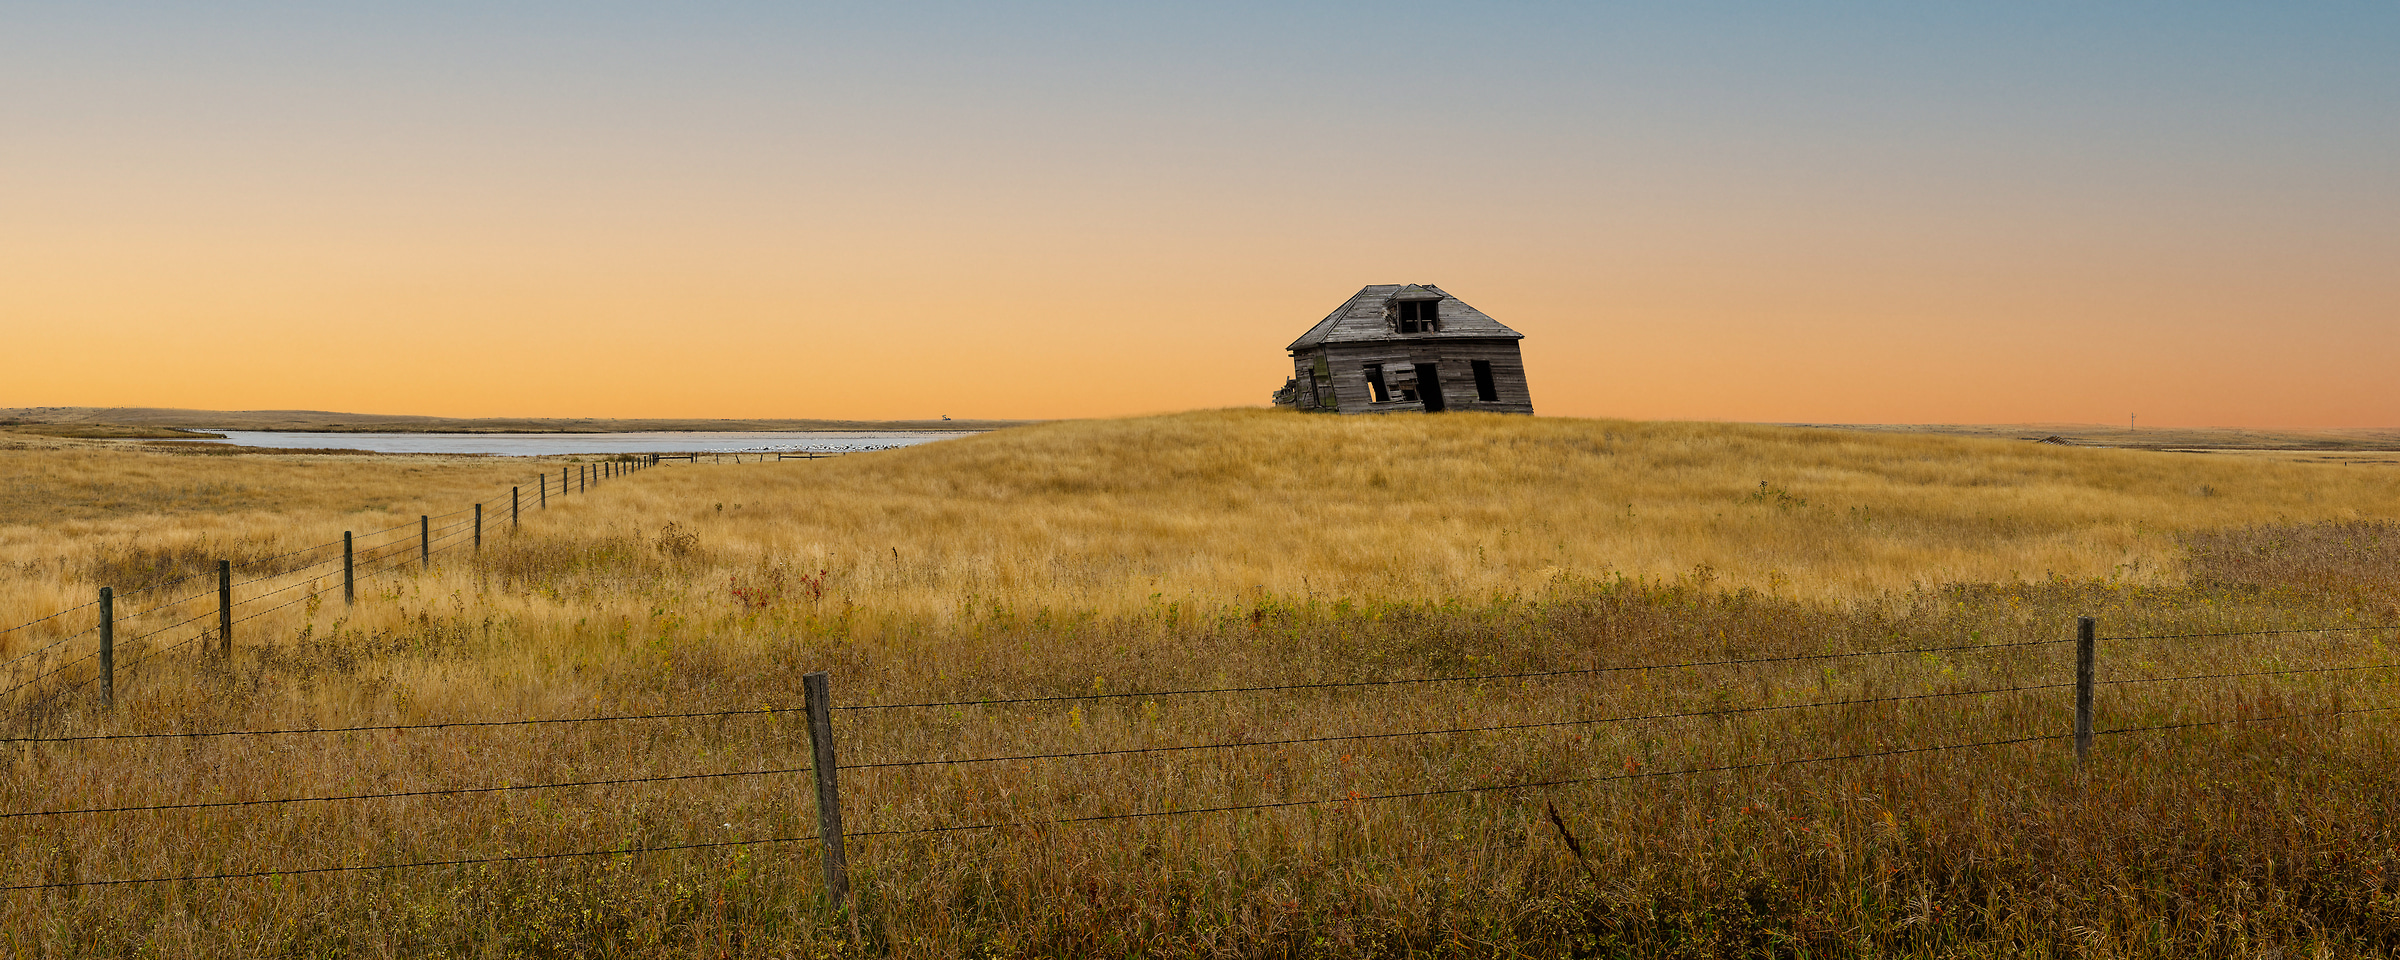 863 megapixels! A very high resolution, large-format VAST photo print of an abandoned house in a field at sunrise; landscape photograph created by Scott Dimond in Vulcan County, Alberta, Canada